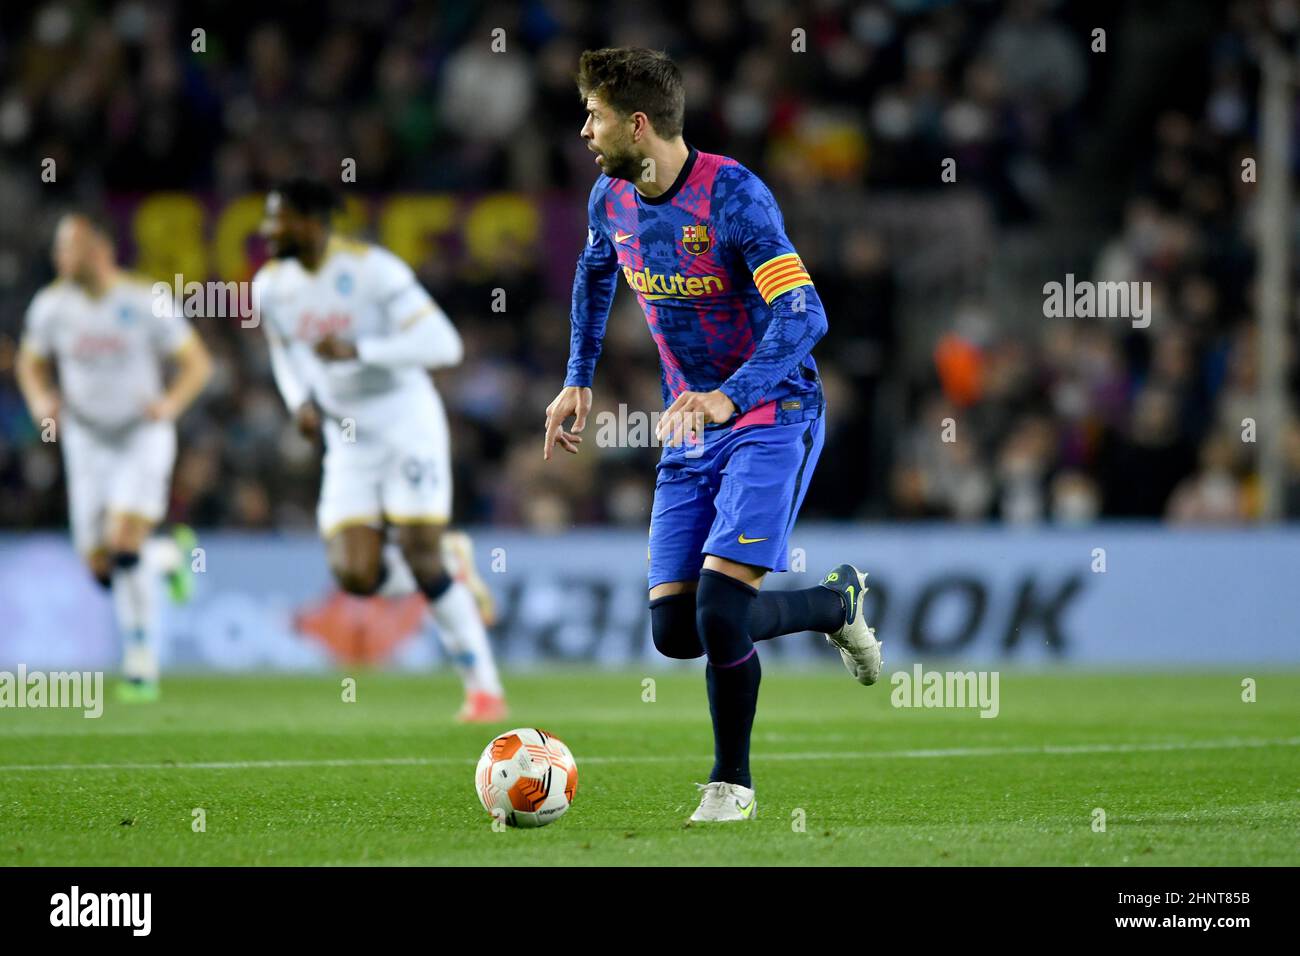 Barcelona,Spain.17 February,2022.  Gerard Pique (3) of FC Barcelona during the Europa League match between FC Barcelona and SSC Napoli at Camp Nou Stadium. Credit: rosdemora/Alamy Live News Stock Photo